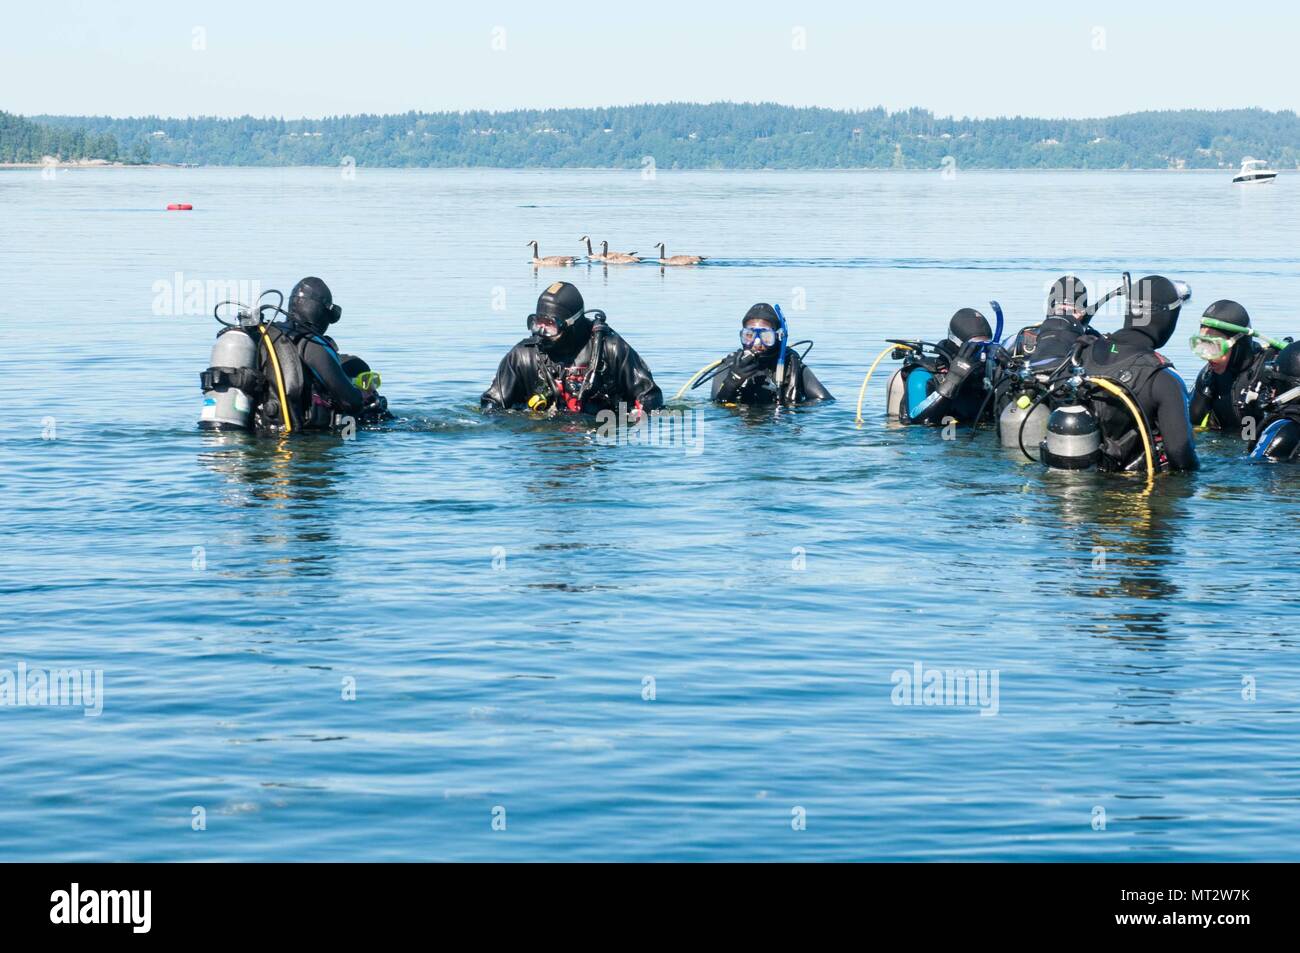 Mike Nebel a dive instructor with the Northwest Adventure Center on Joint Base Lewis-McChord, leads dive students in pre-dive inspections and buoyancy checks during a open water scuba class at Sunnyside Beach in Steilacoom, Washington, June 24, 2017. (U.S. Army photo by Sgt. Youtoy Martin, 5th Mobile Public Affairs Detachment) Stock Photo